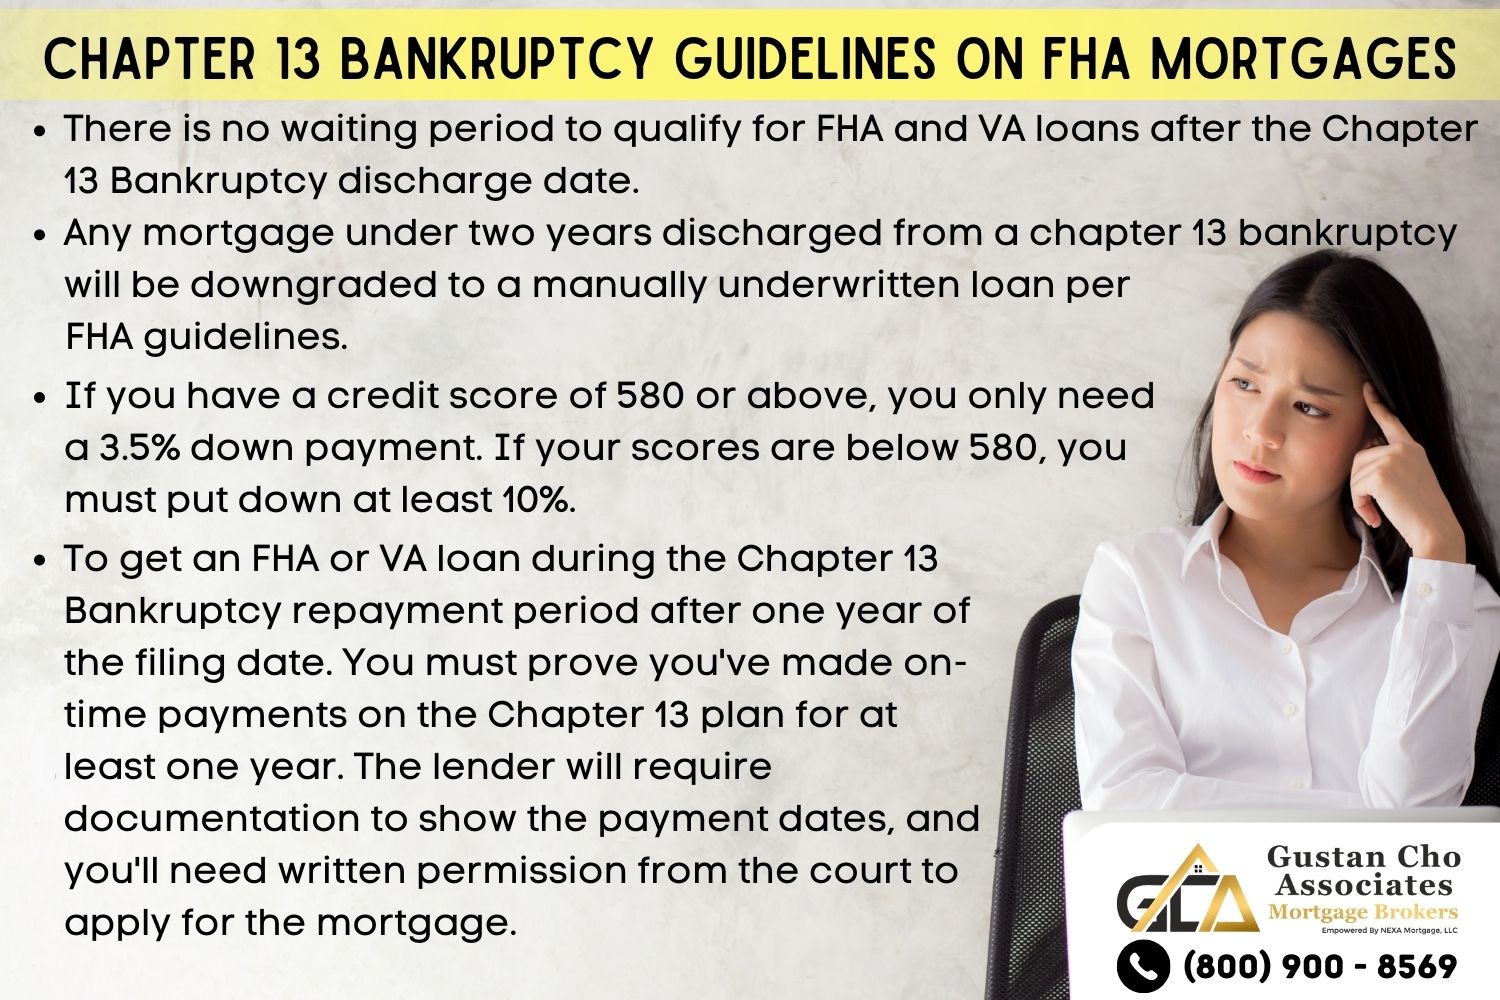 Chapter 13 Bankruptcy Guidelines on FHA Mortgages